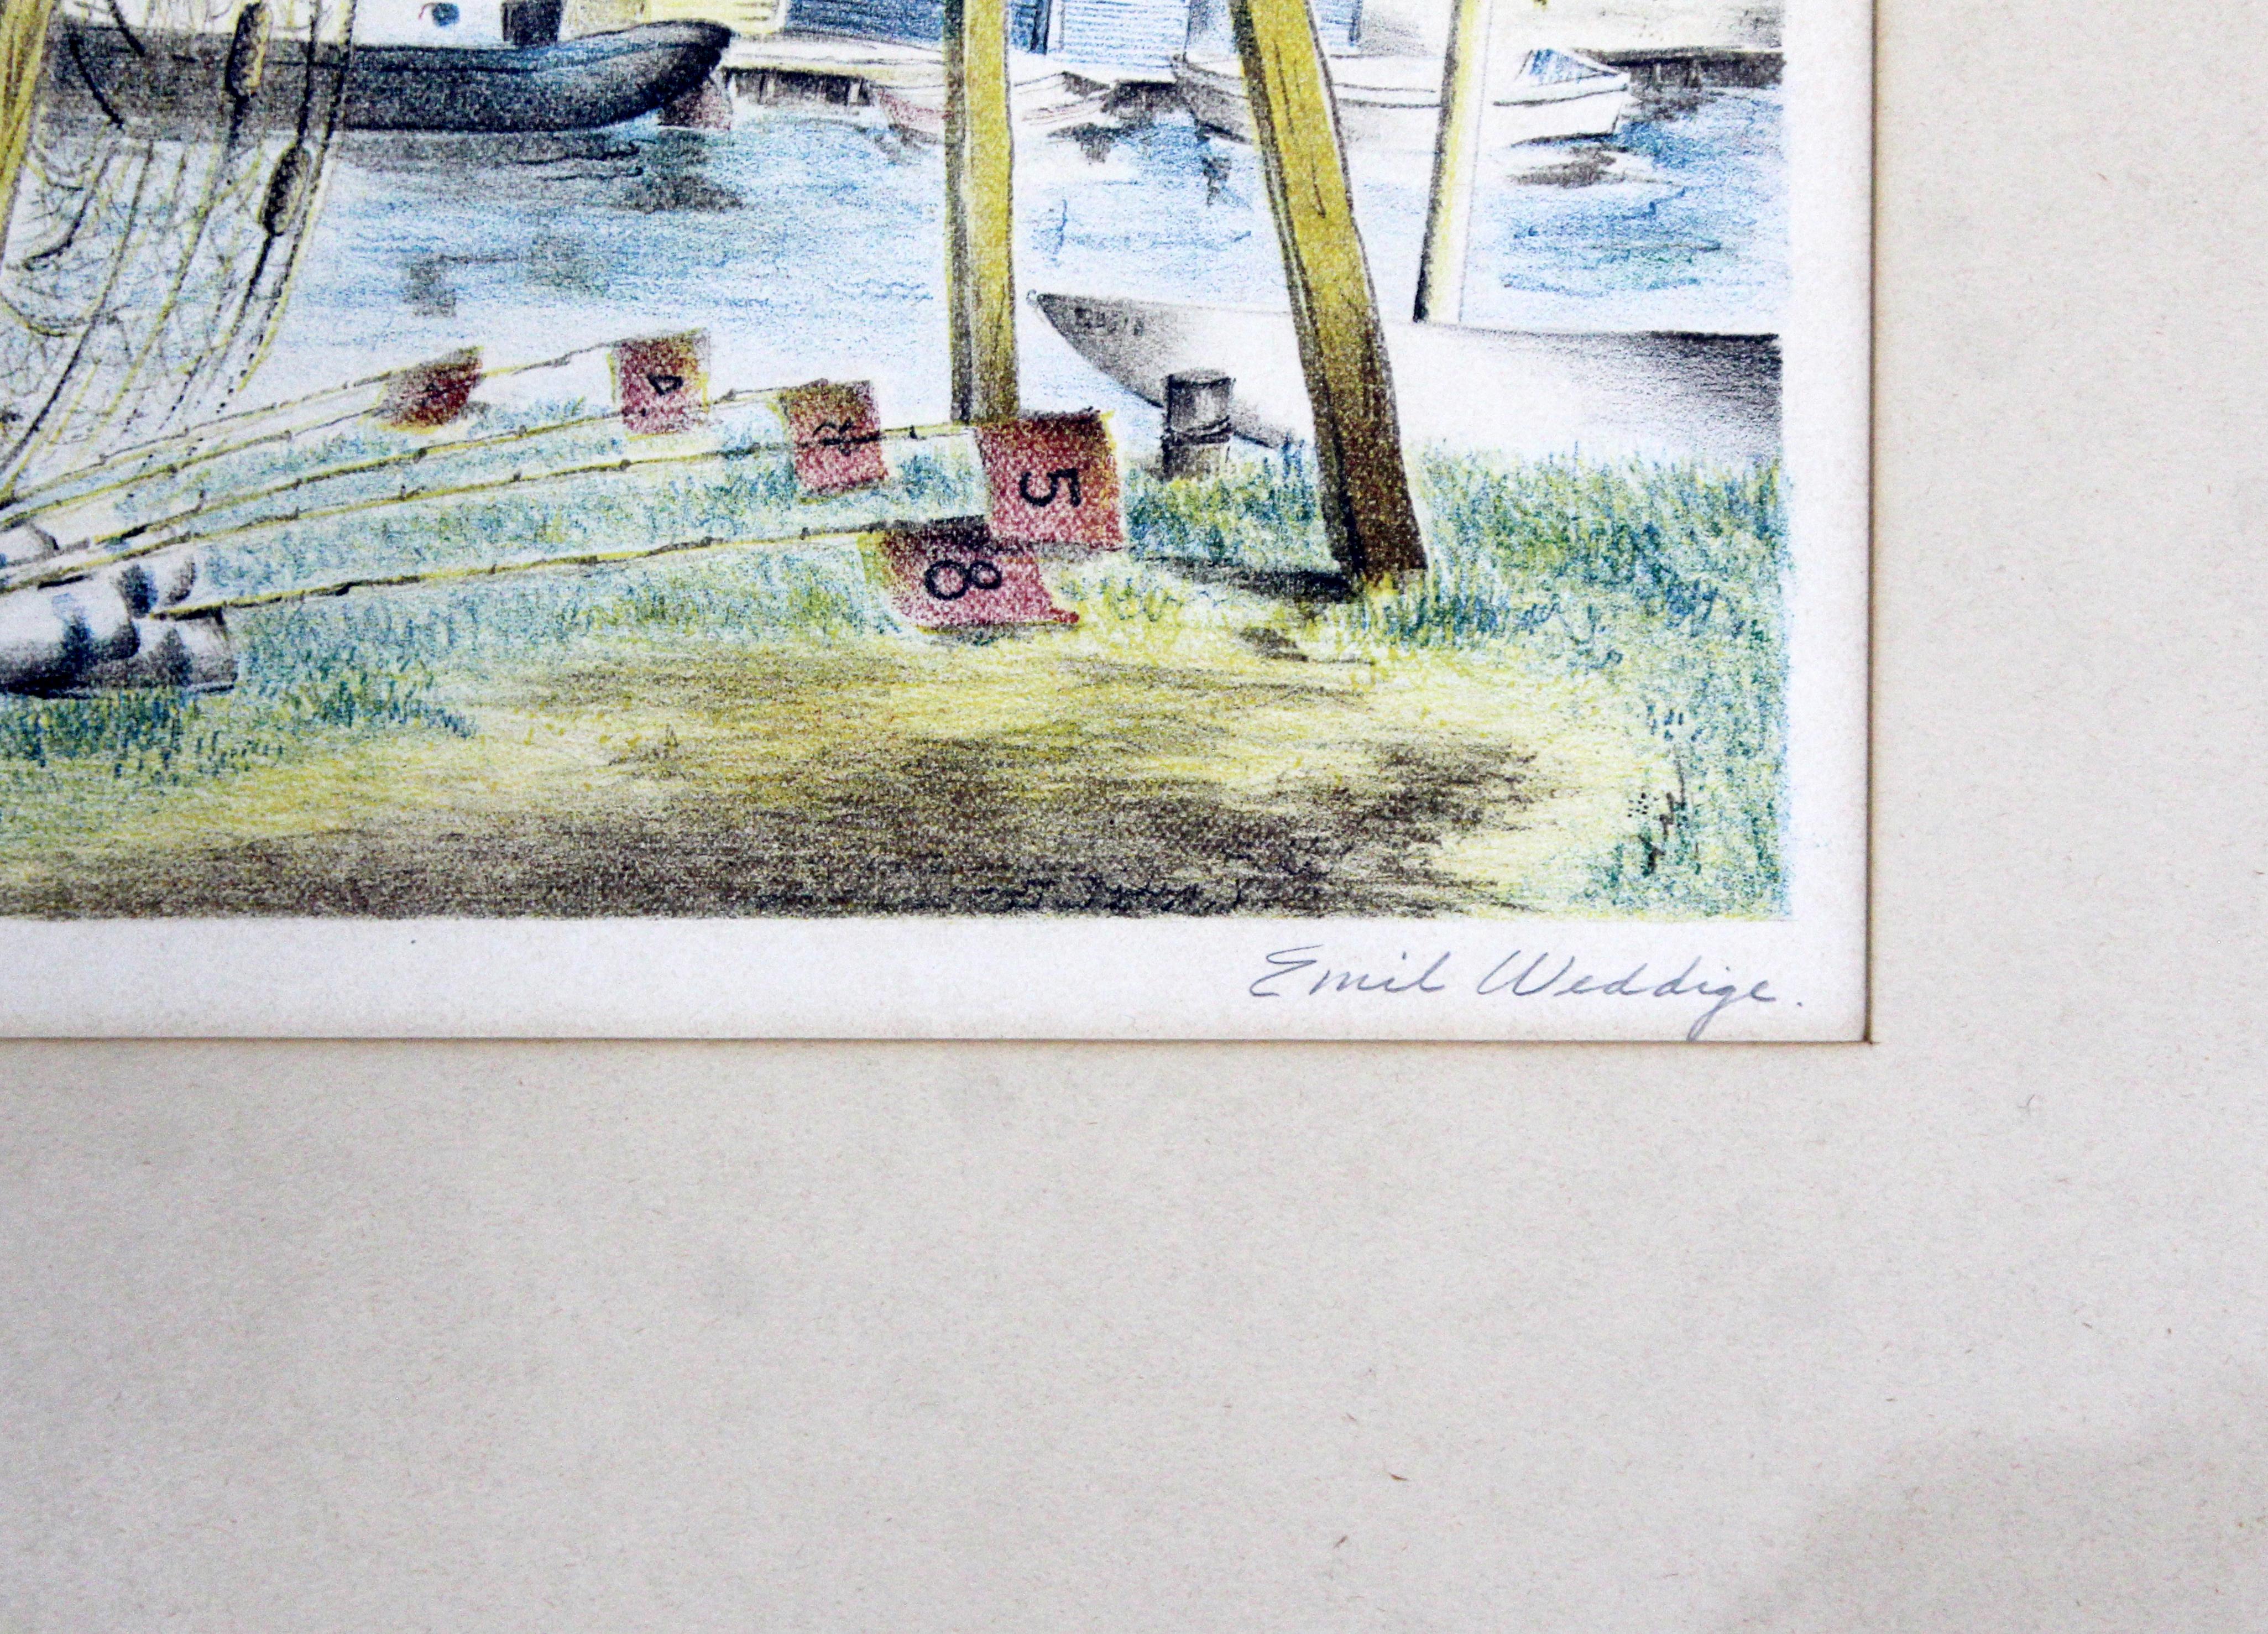 Paper Mid-Century Modern Emil Weddige Framed Signed Lithograph Fish Shanties